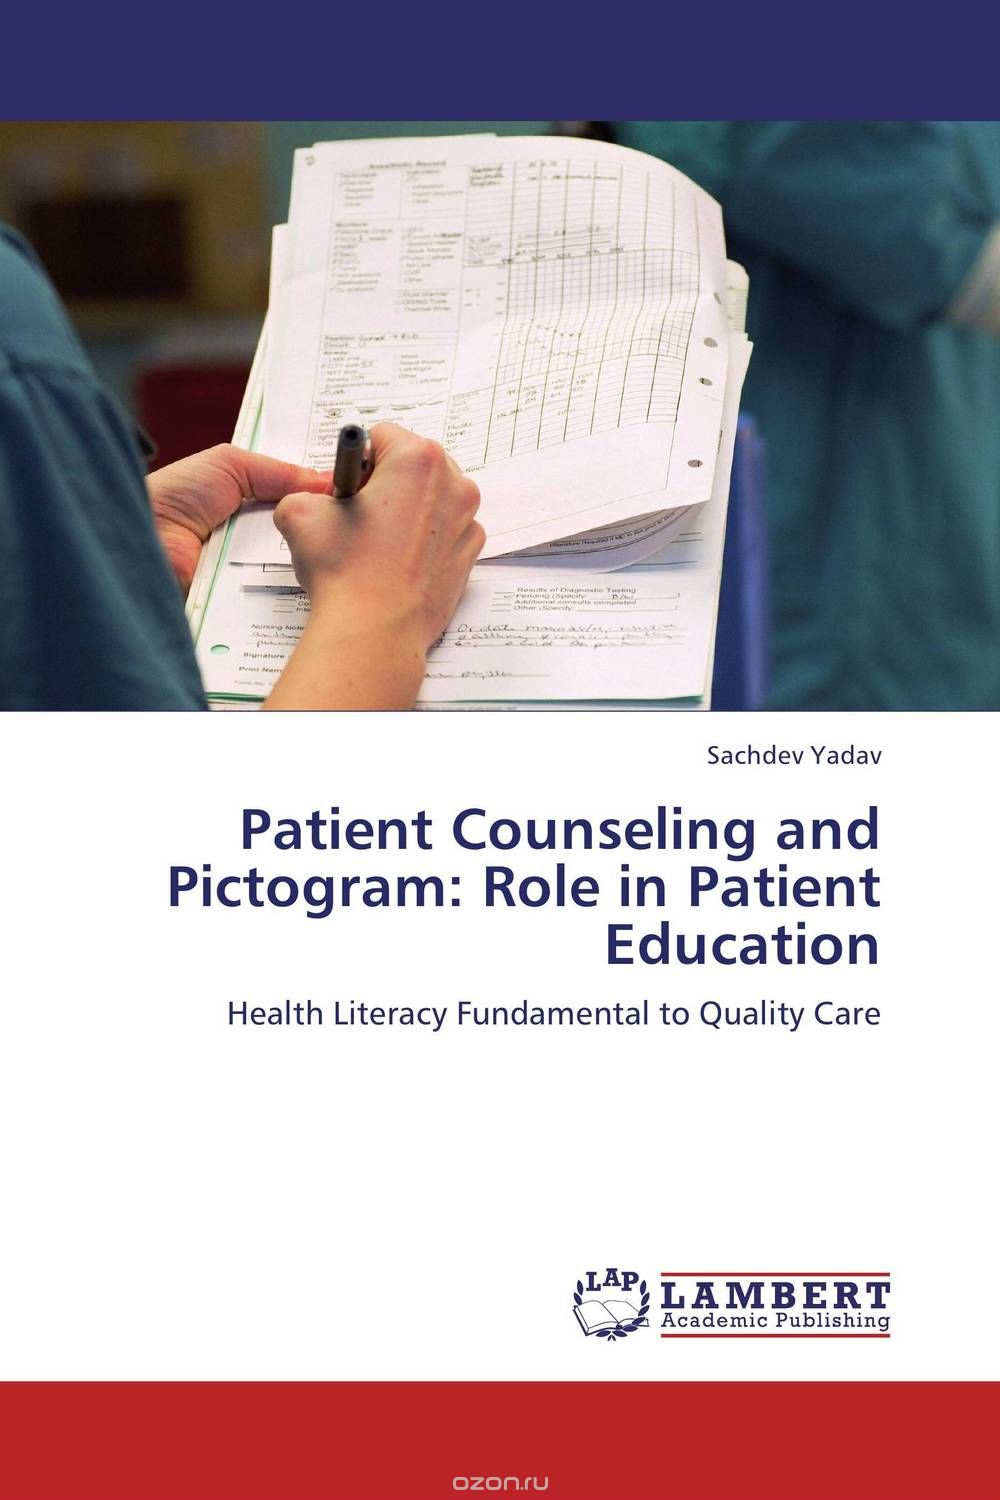 Patient Counseling and Pictogram: Role in Patient Education